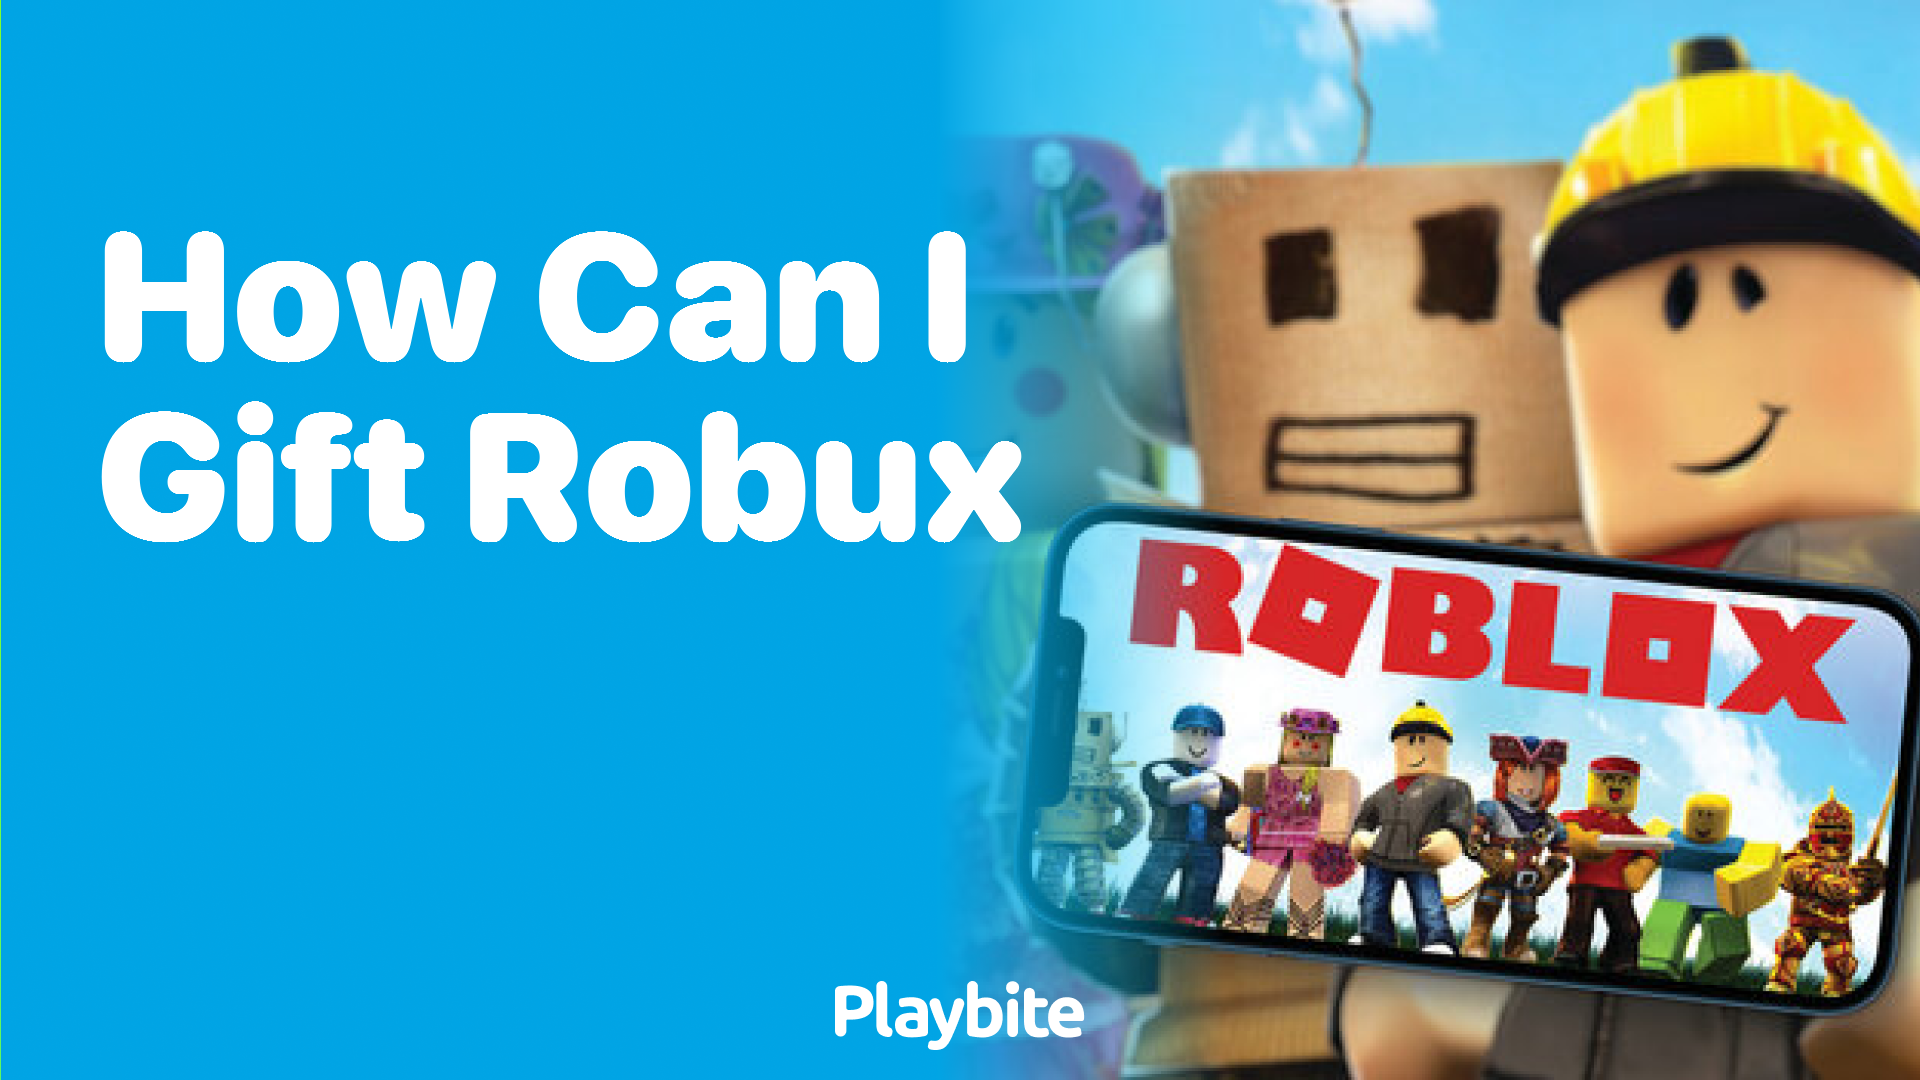 How Can I Gift Robux? Let&#8217;s Find Out!